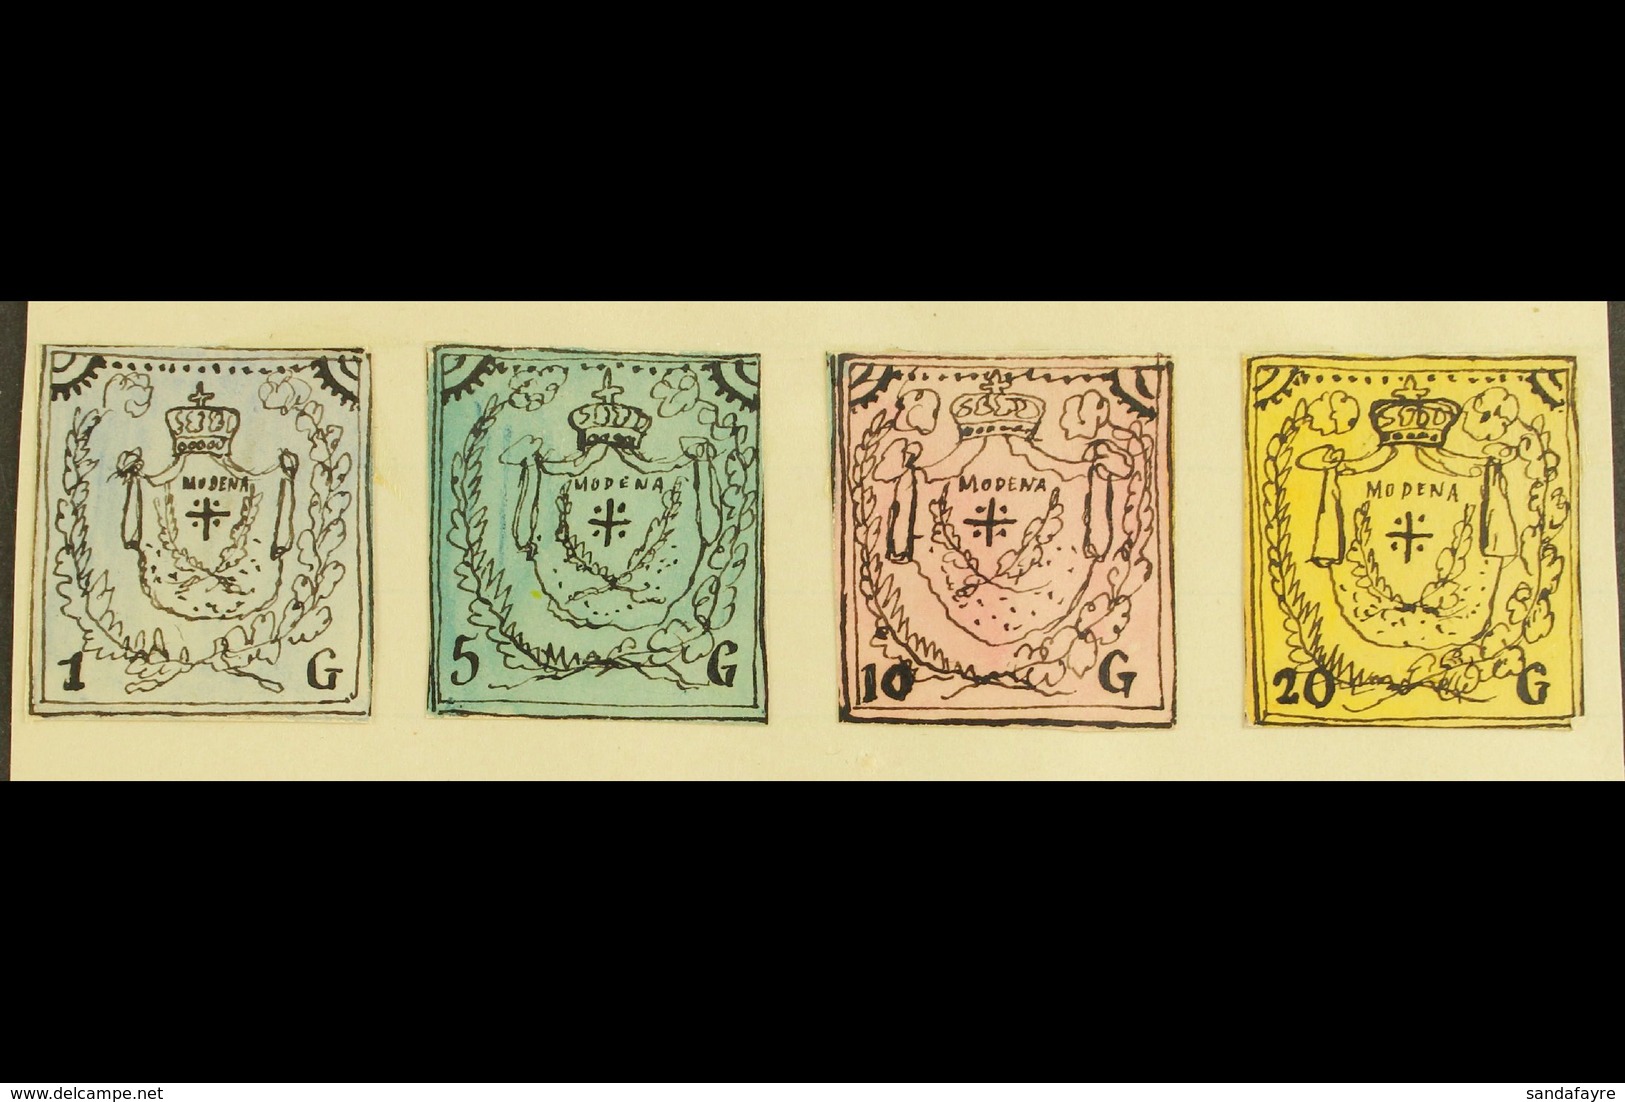 1861 HAND PAINTED STAMPS Unique Miniature Artworks Created By A French "Timbrophile" In 1861. MODENA Four Values Only Va - Unclassified